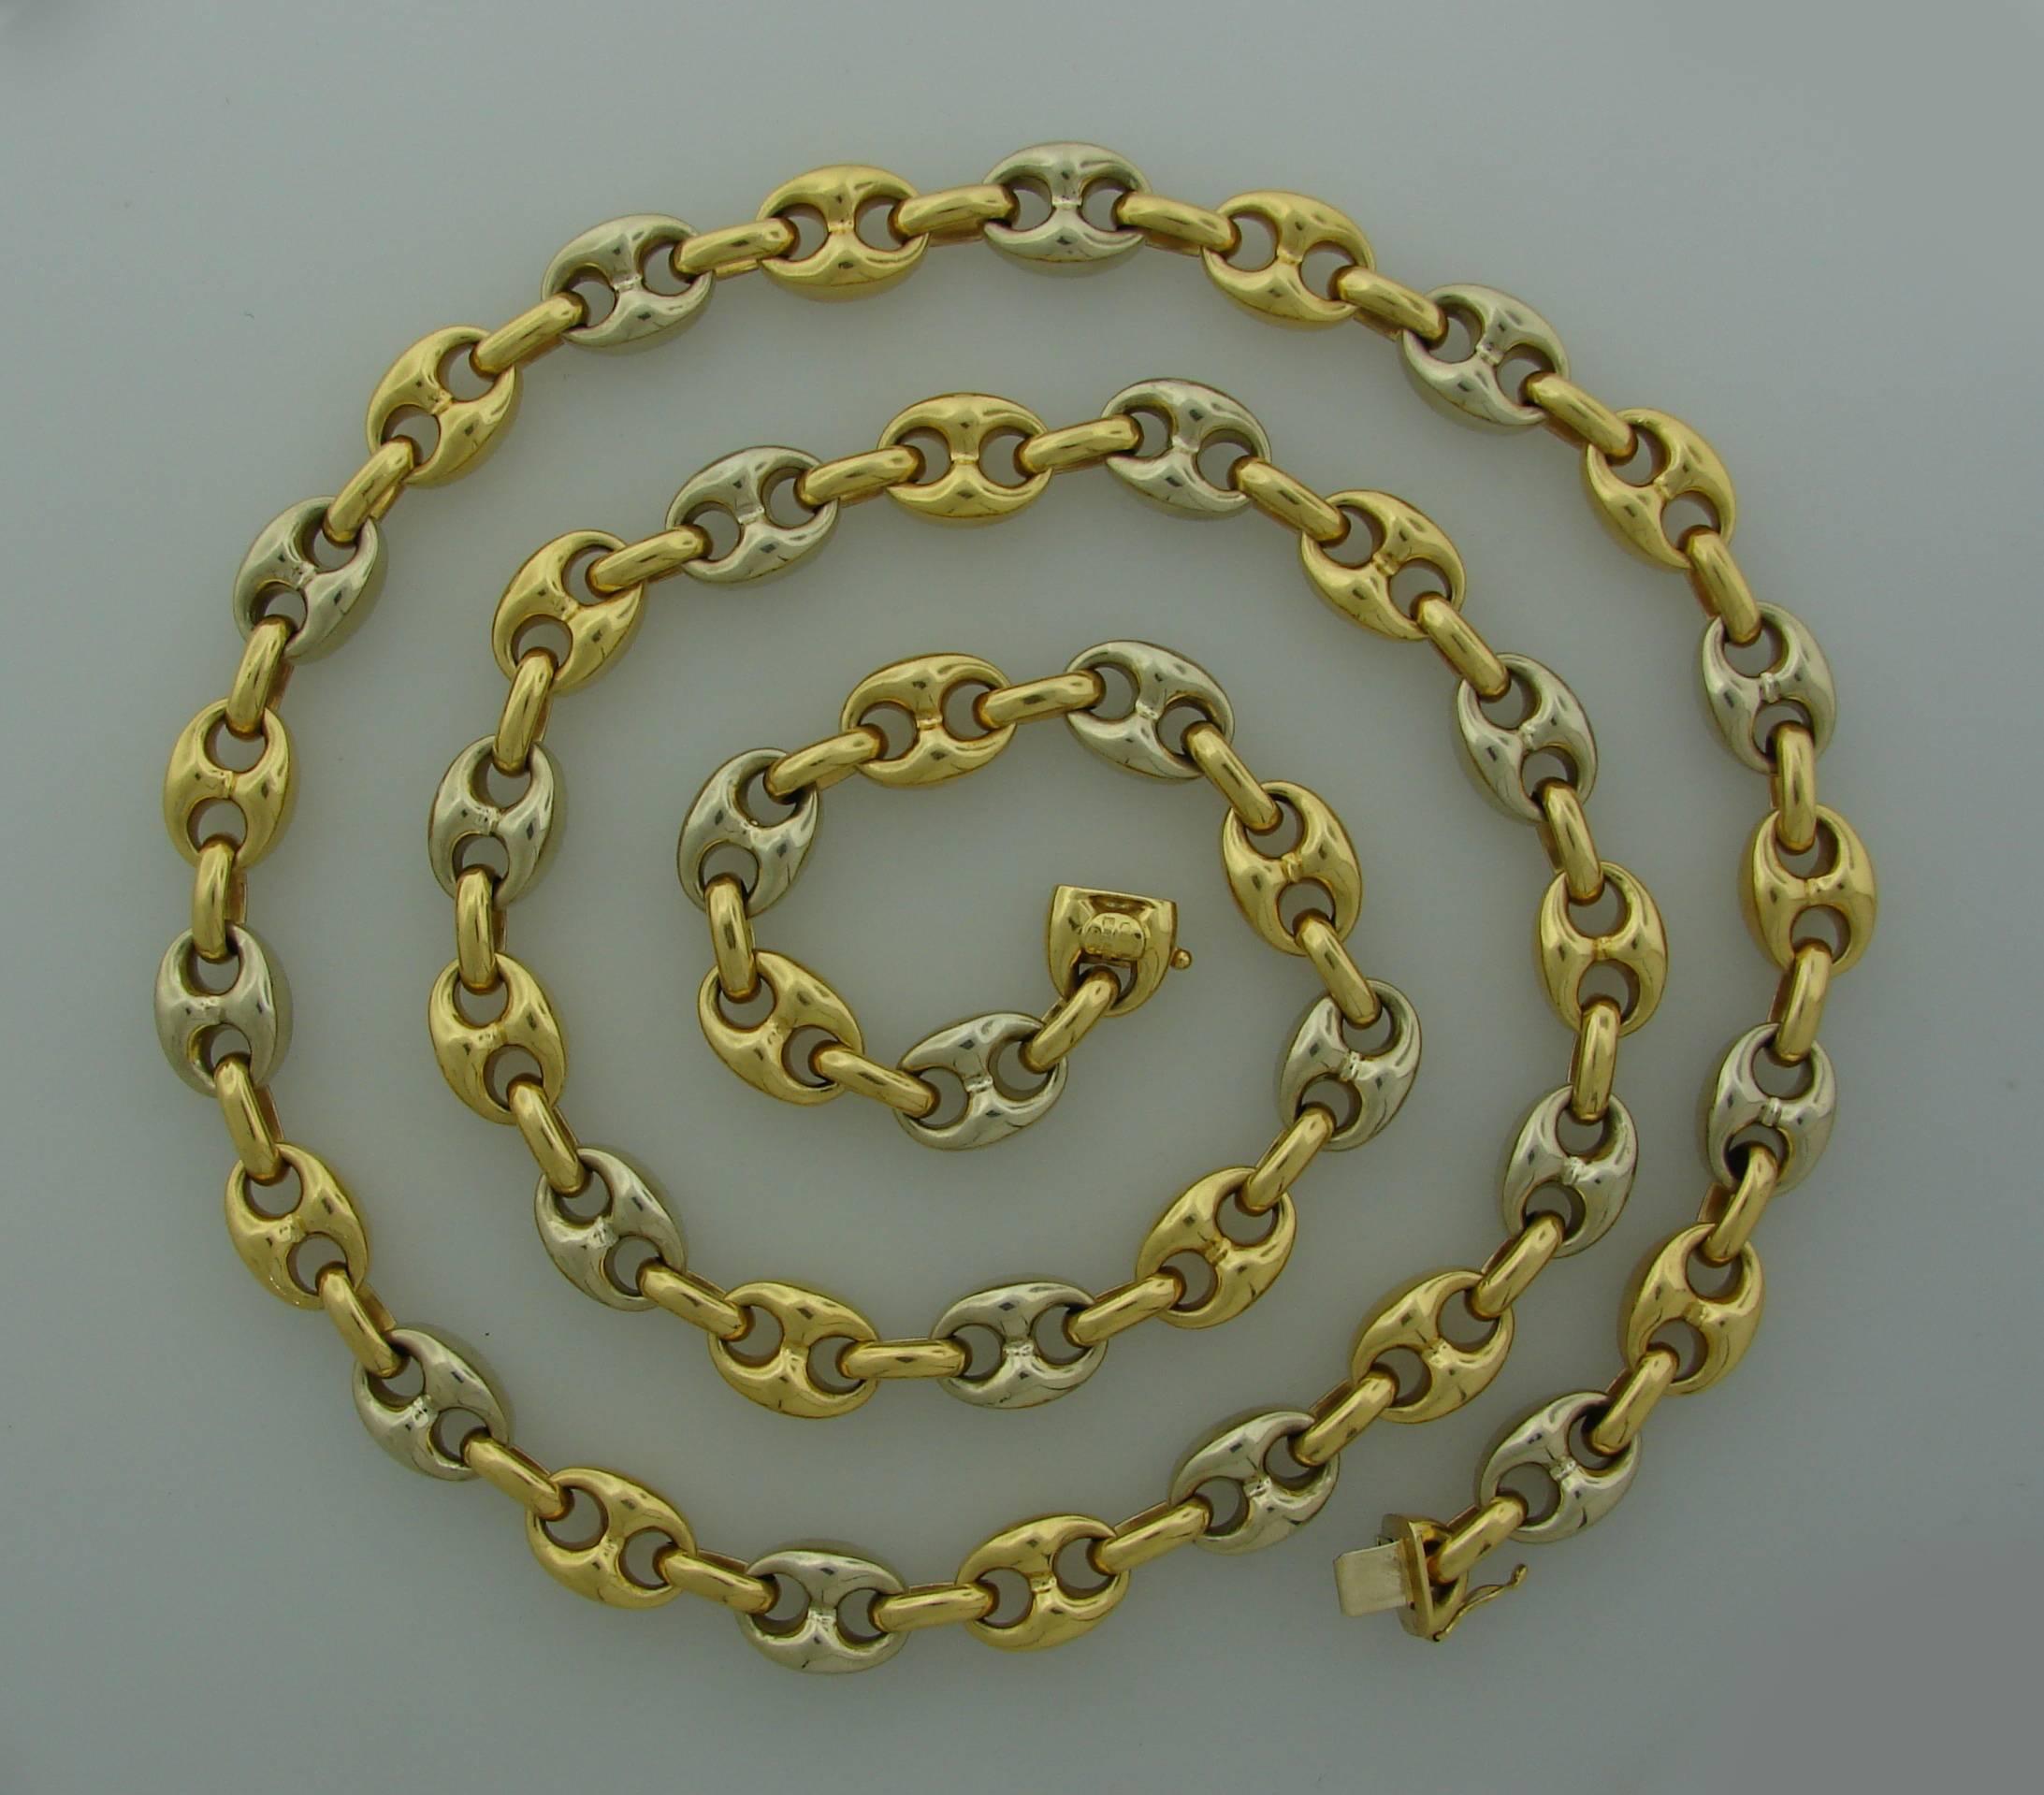 Bold yet classy nautical link chain necklace created by Van Cleef & Arpels in Italy in the 1970's. Elegant, timeless and wearable, the chain is a great addition to your jewelry collection.
Made of 18 karat (stamped) yellow and white gold. 
Measures